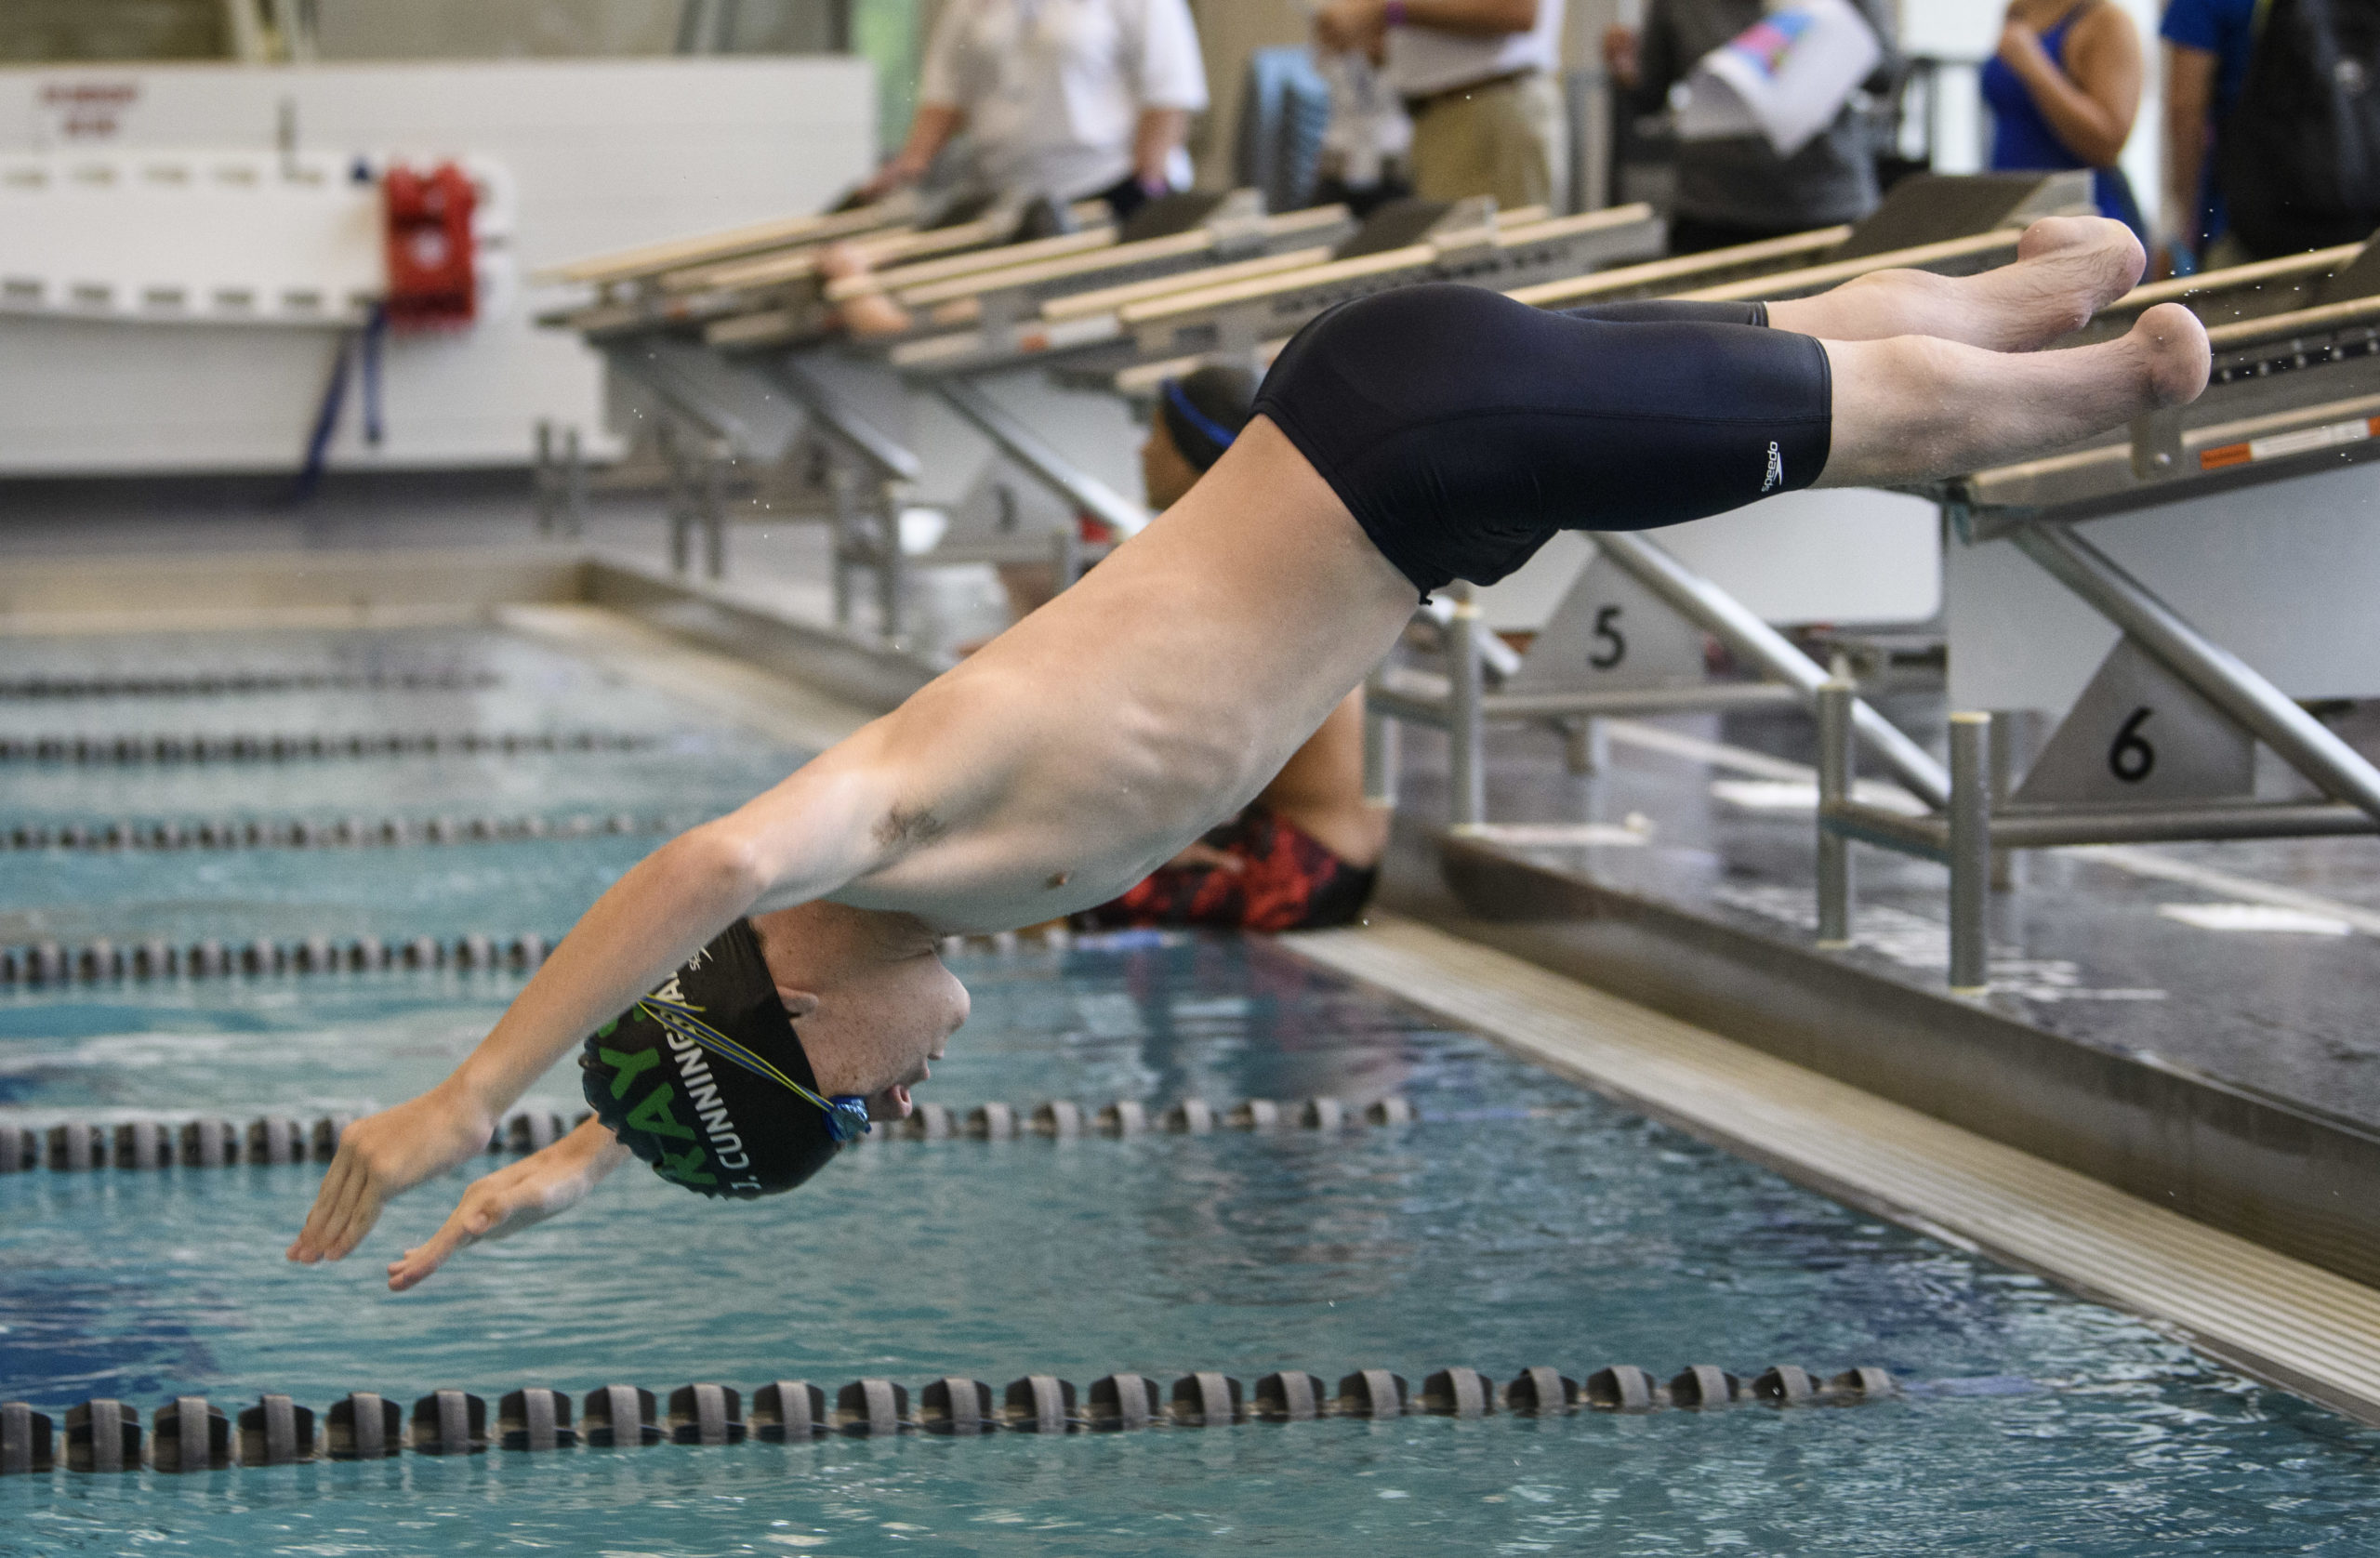 Male athlete with double leg amputation diving off of diving block into the swimming pool